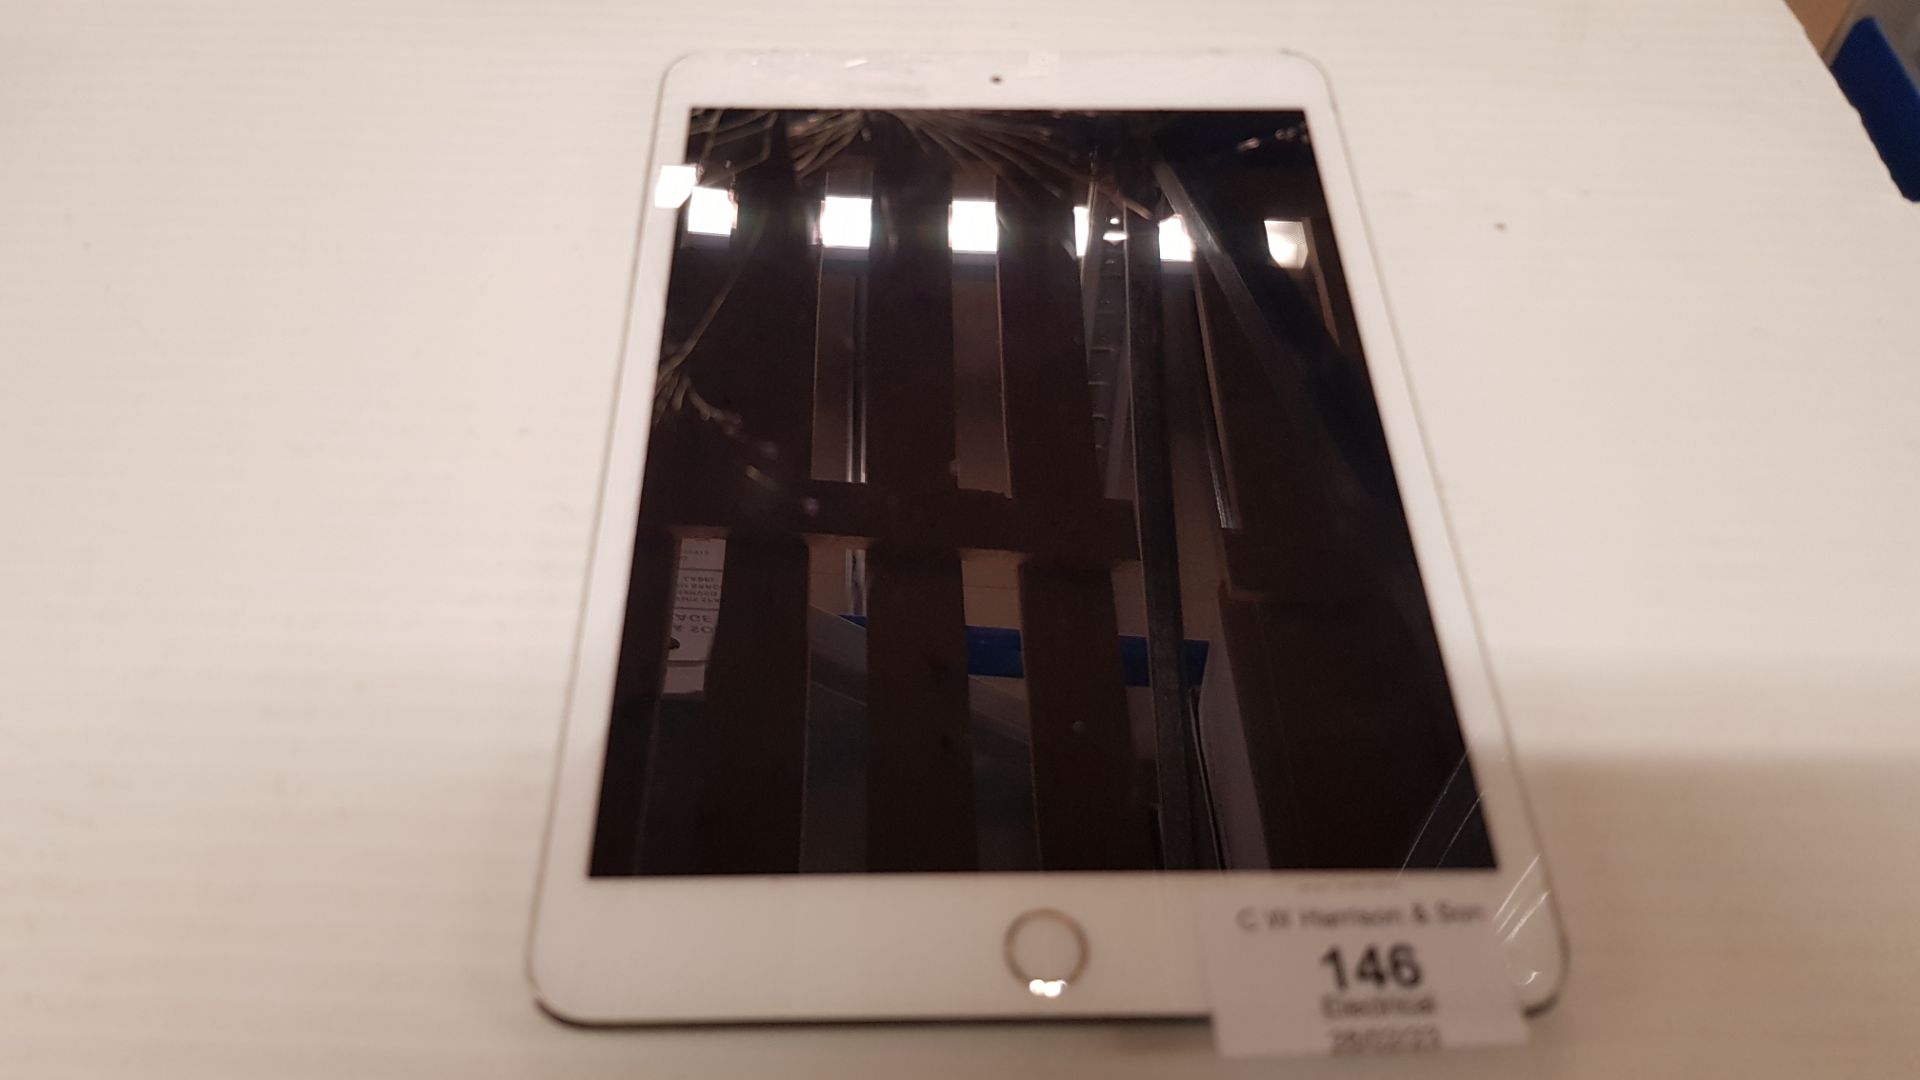 iPad Mini (Model A1600). Main Body Only, Unit Powers On Showing Battery Symbol. - Image 2 of 4